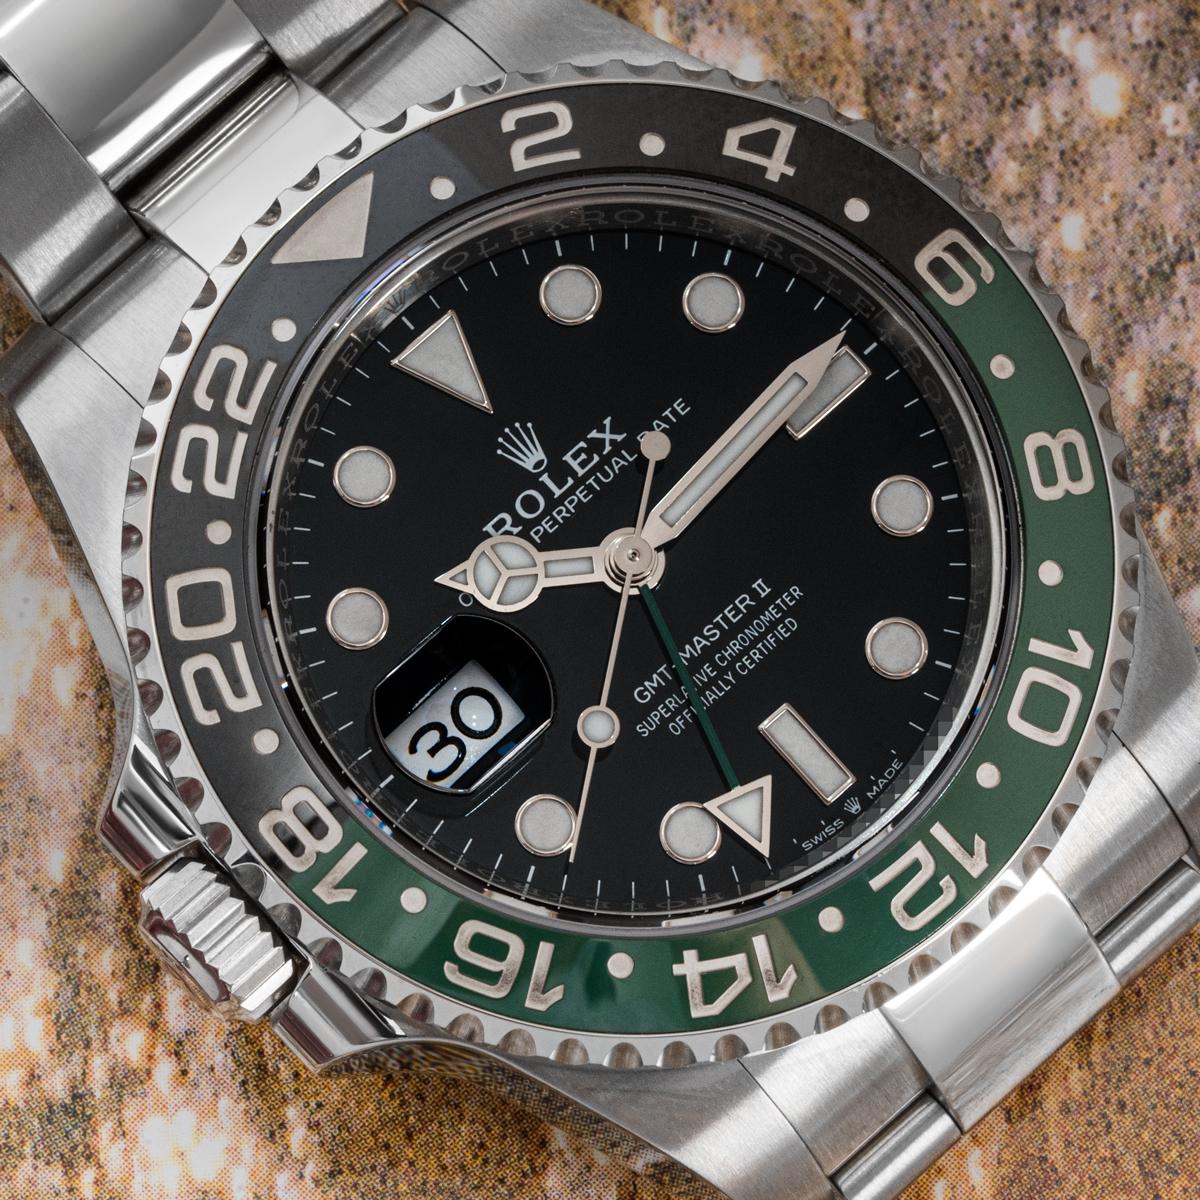 A GMT-Master II Sprite Left Handed by Rolex crafted in stainless steel. Featuring a black dial with a green time zone hand. The green and black bidirectional rotatable bezel features a 24-hour display and is presented with a distinctive crown set on